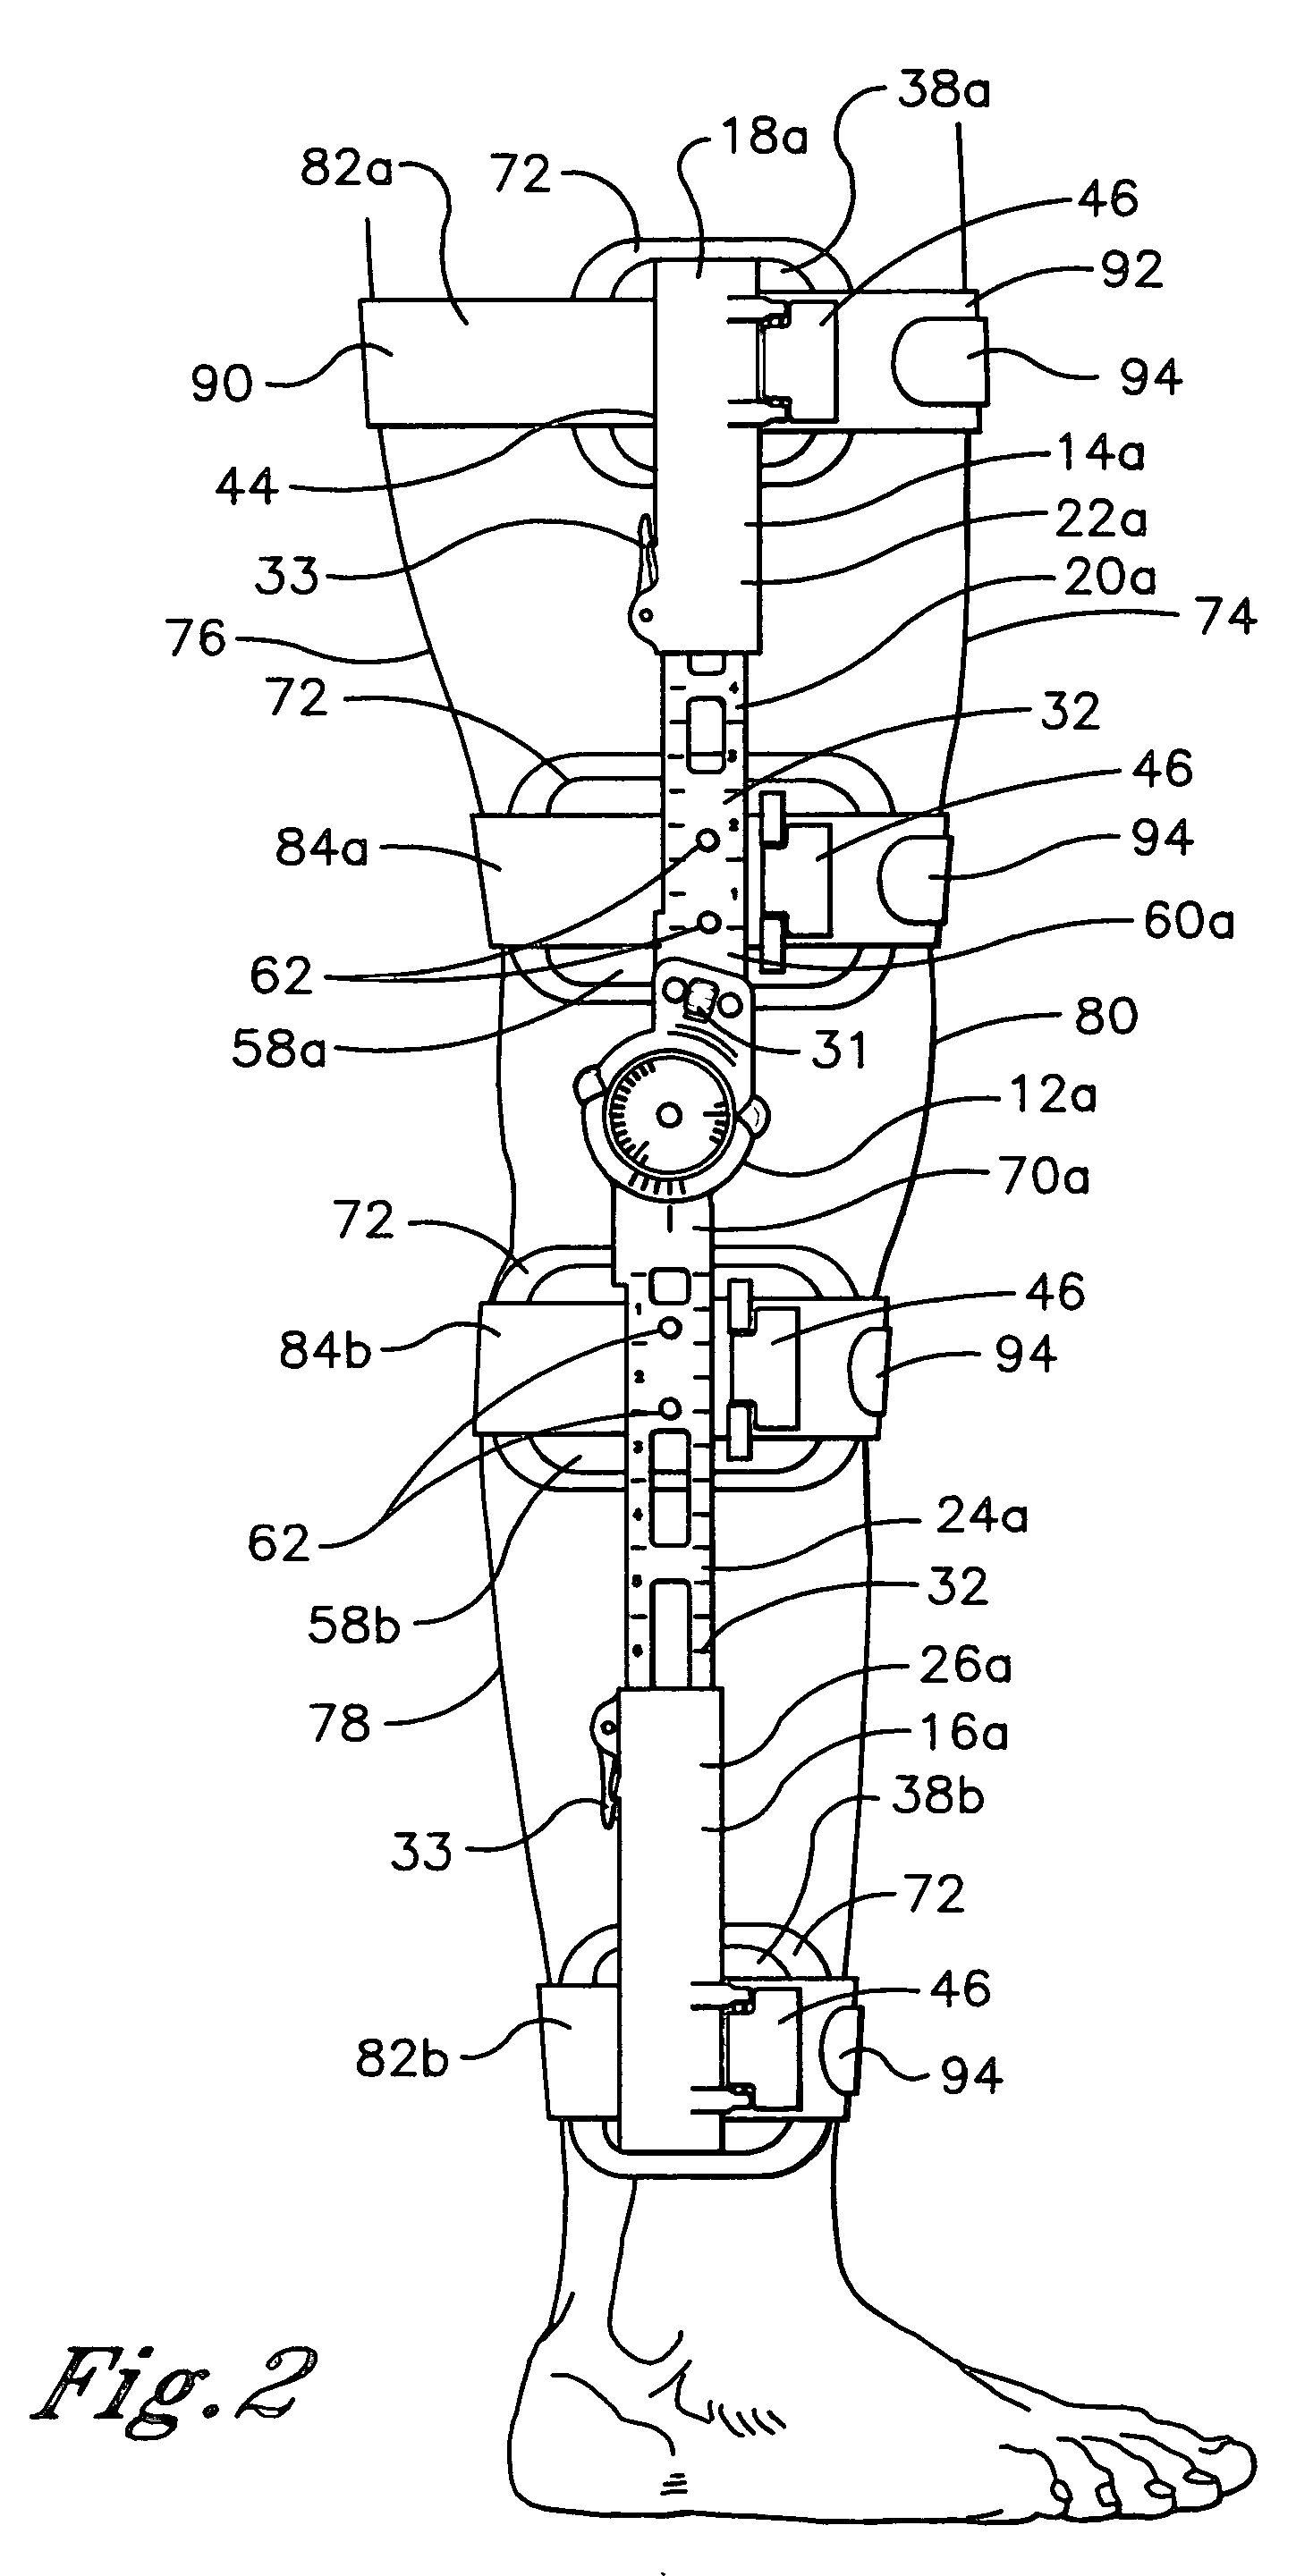 Method for fitting an orthopedic brace to the body